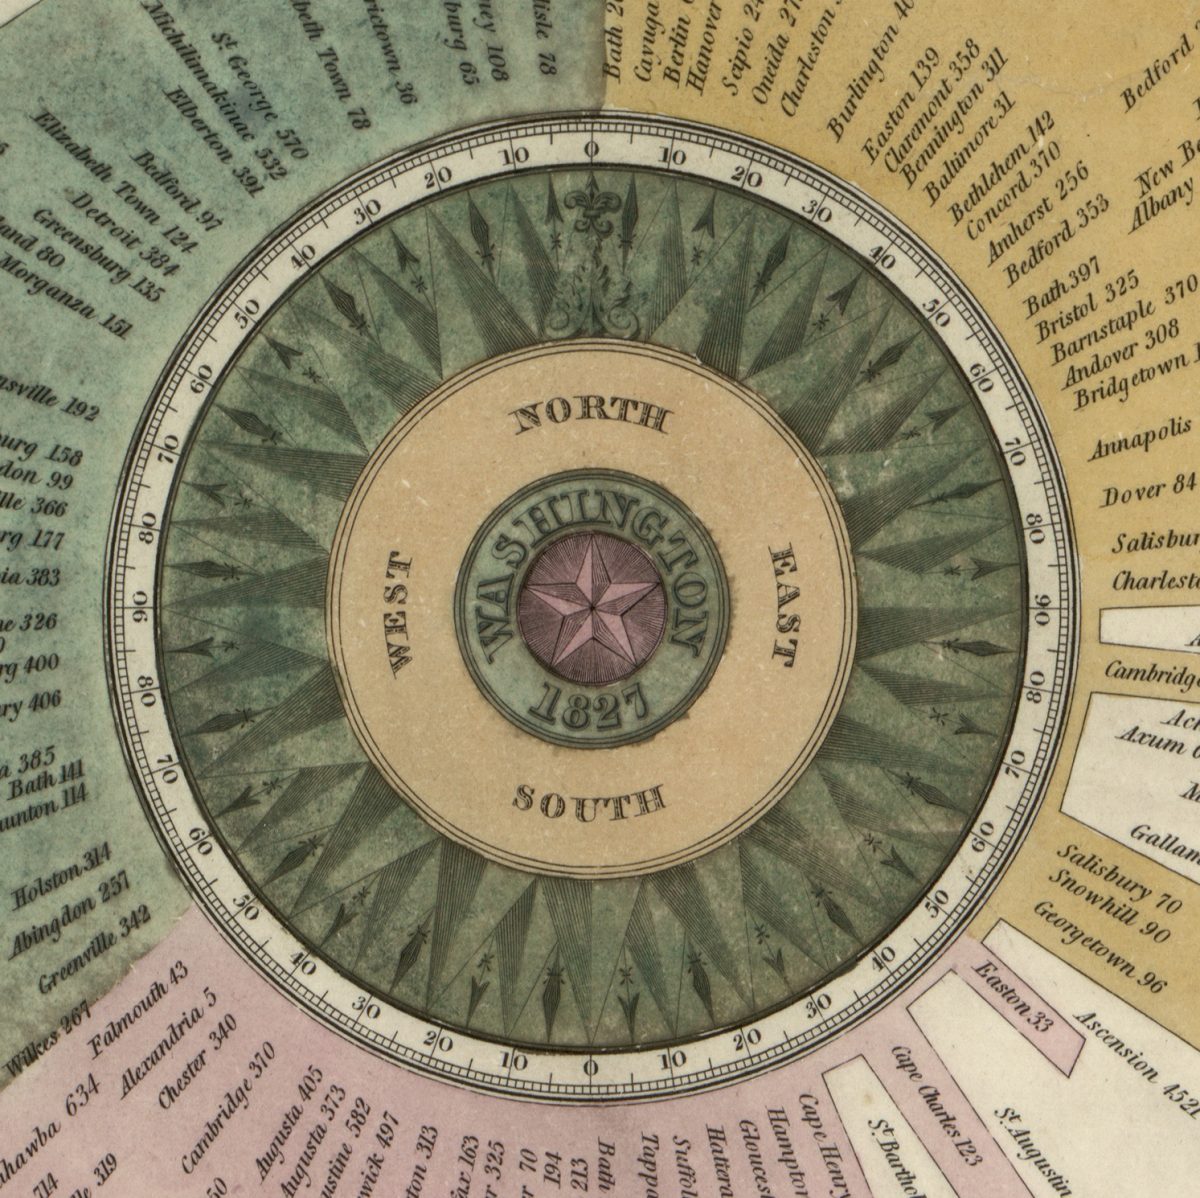 Compendious chart exhibiting, at one view, the names of about thirteen hundred of the principal ports and places in the world, with their bearings per compass, and their distances expressed in geographical miles, from the city of Washington